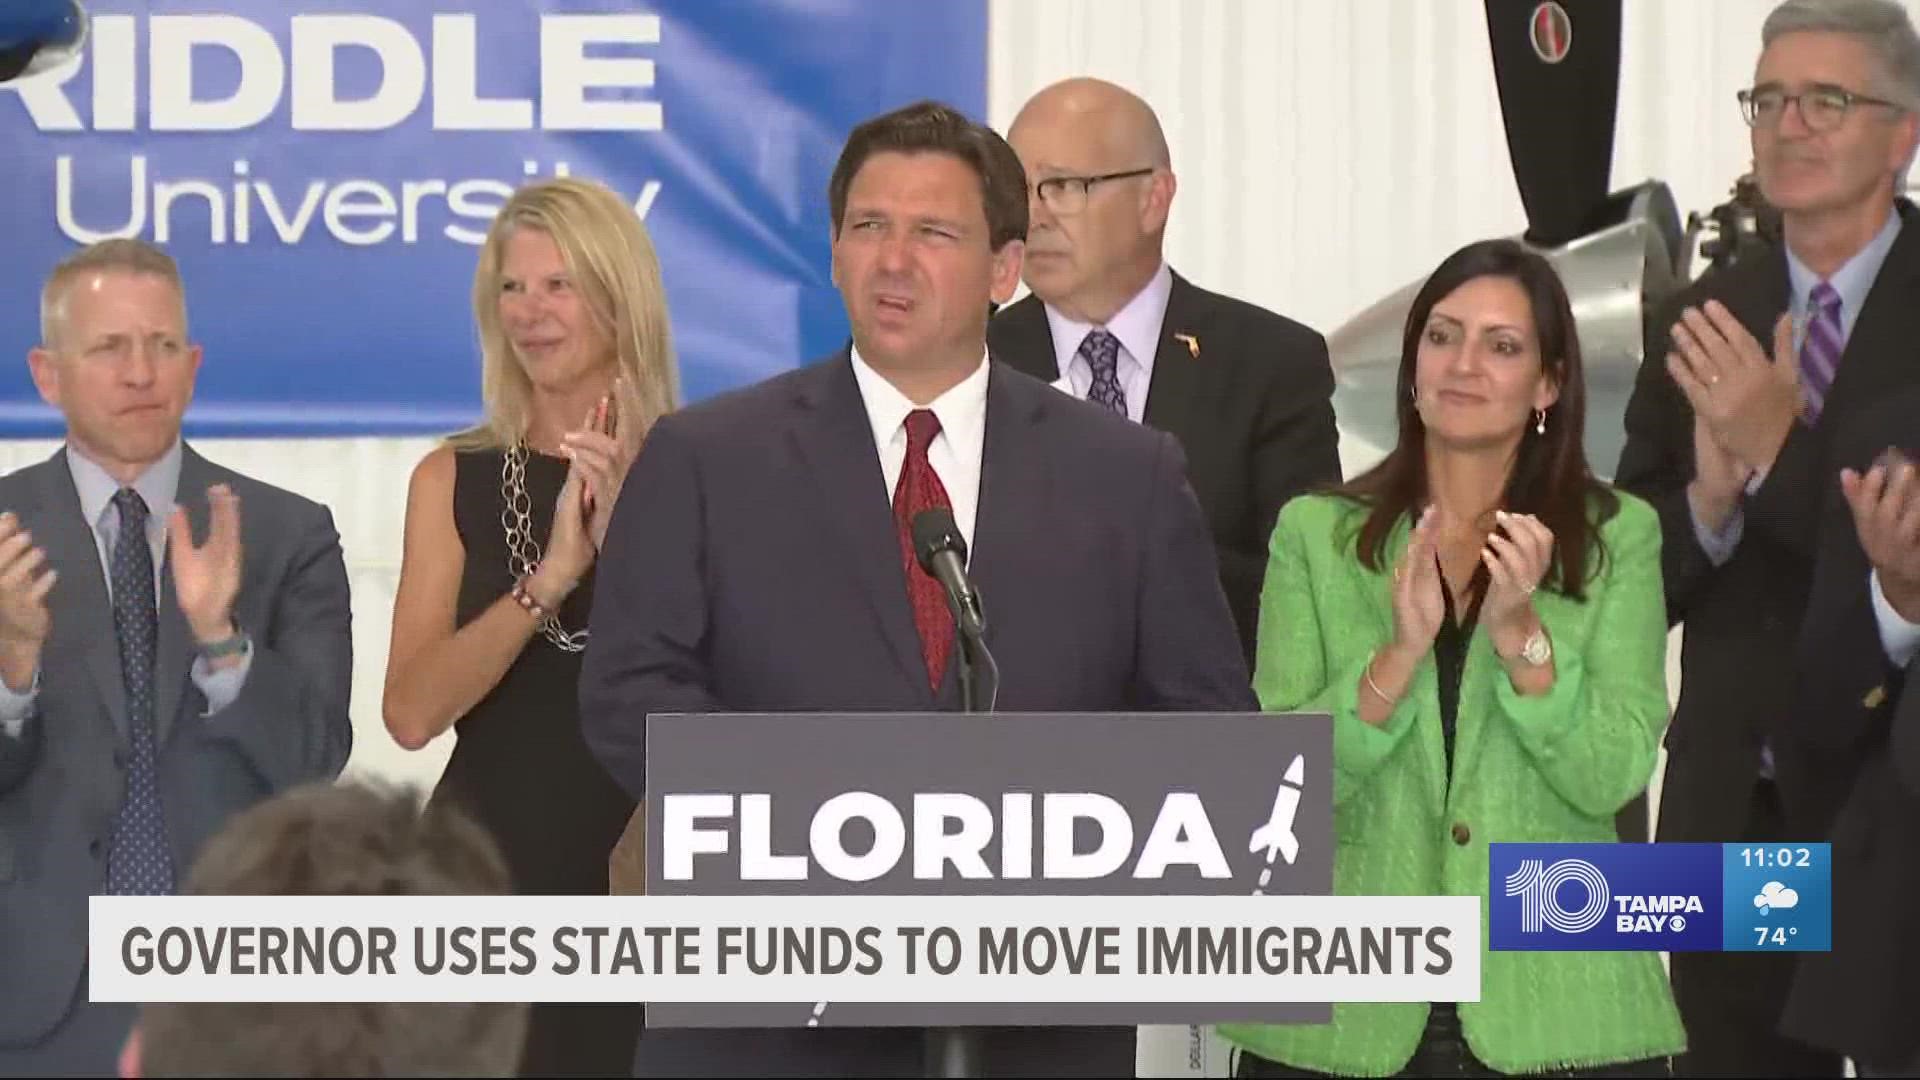 "We've got the infrastructure in place now. There's going to be a lot more that's happening," DeSantis said at a press conference on Friday.